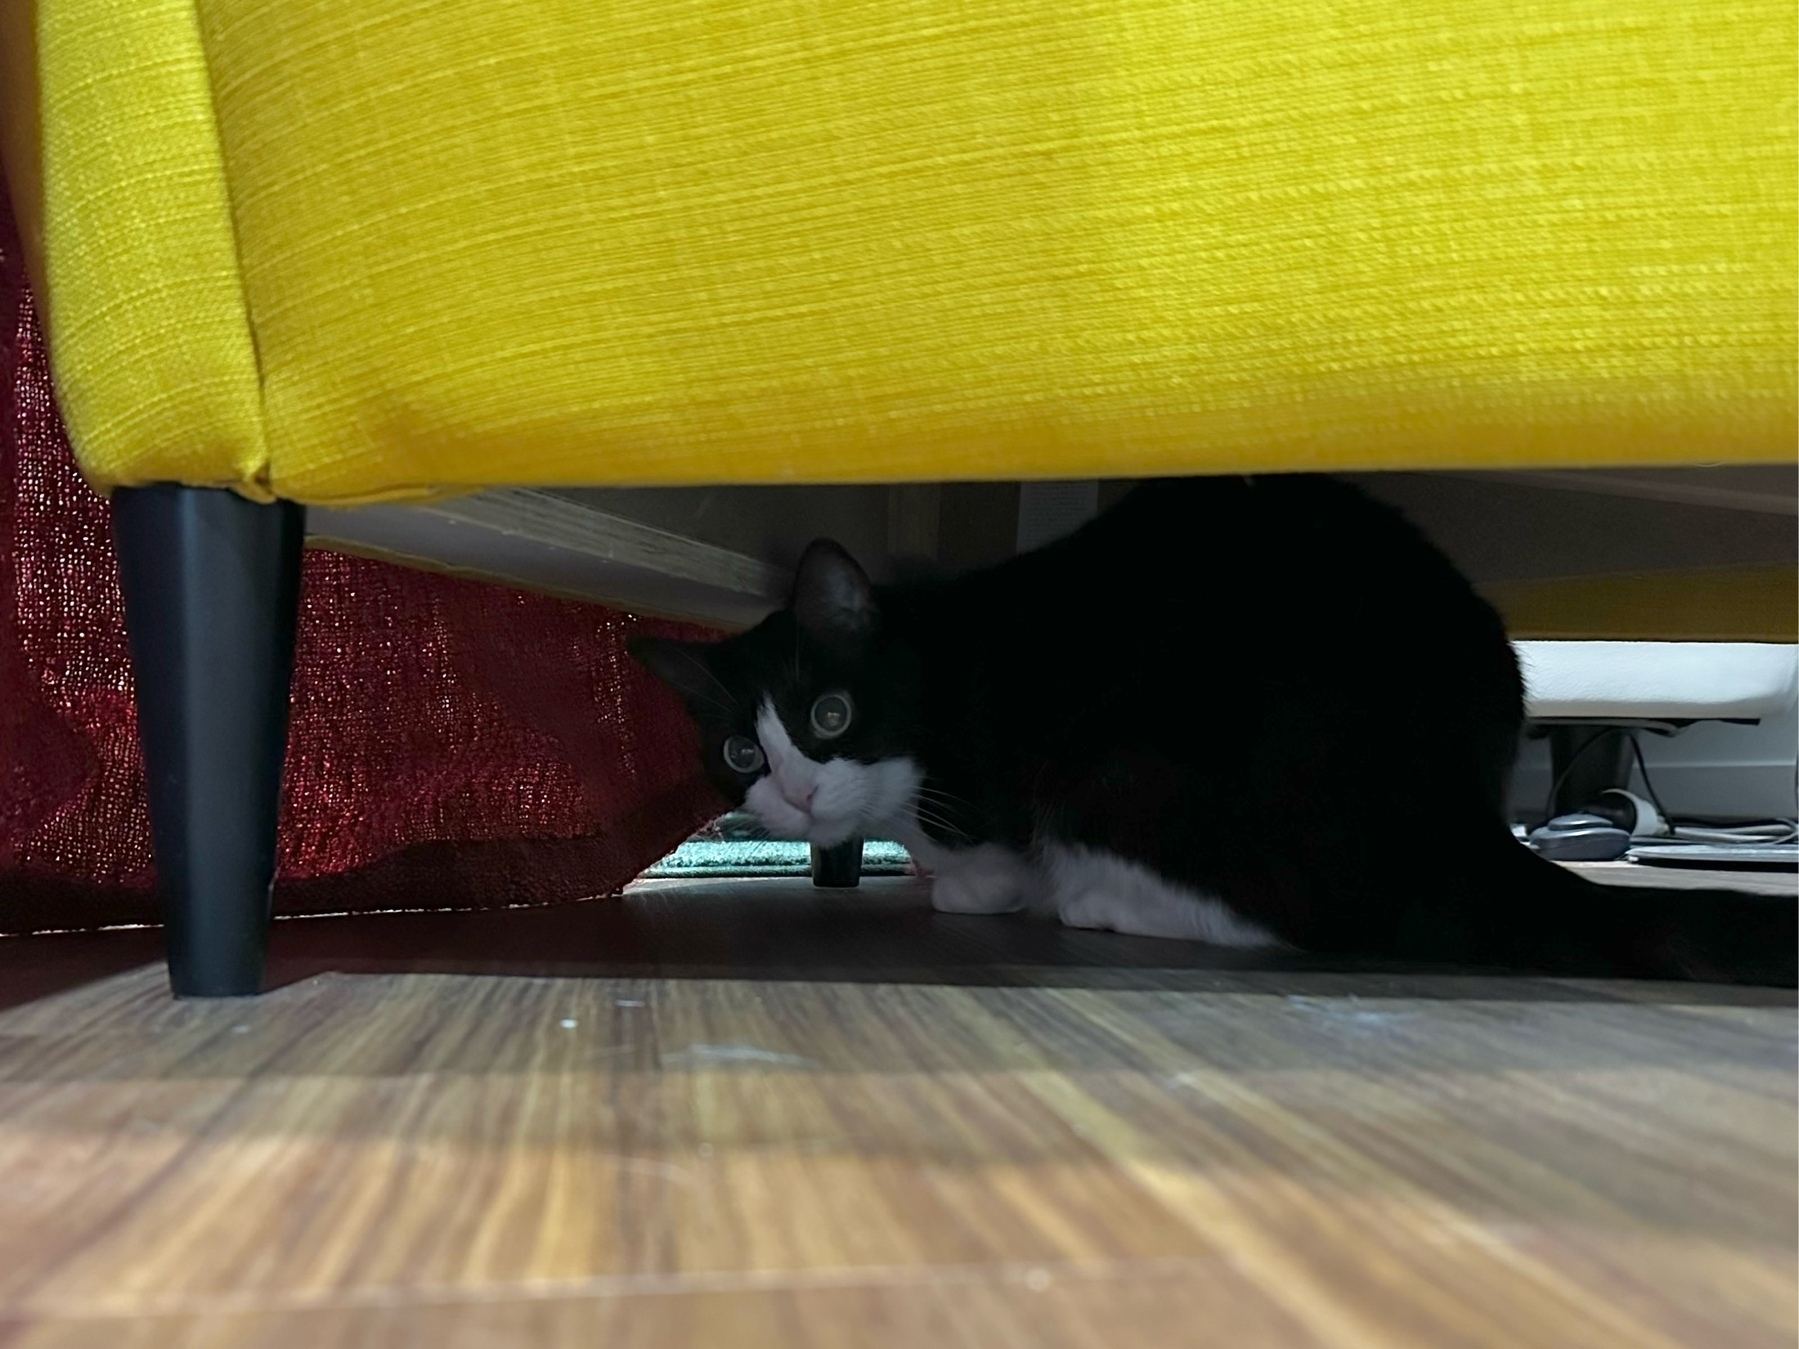 A black and white cat hiding under a yellow chair. The photo is taken from the side and the cat's head is turned towards the camera. A red throw blanket is visible hanging down over the front of the chair, hiding her unless looking under from the side.